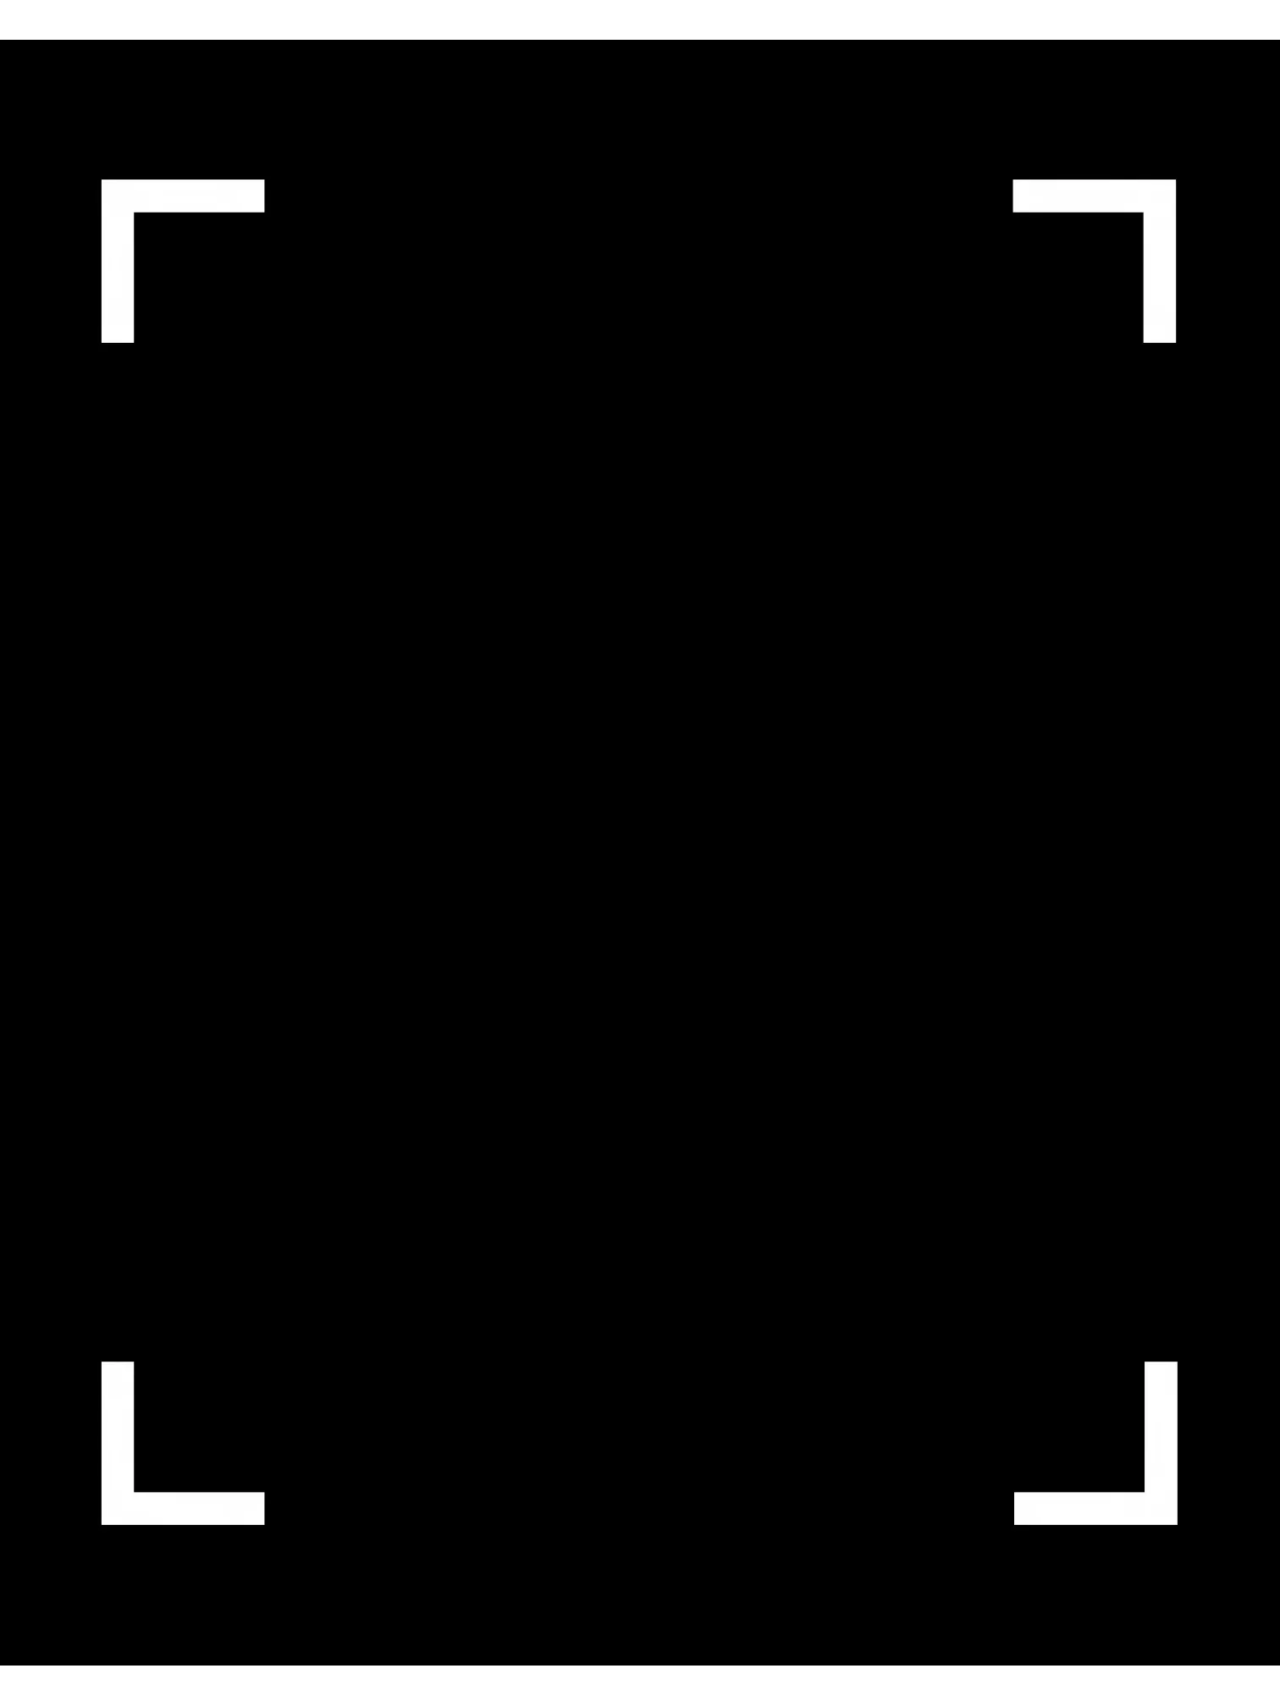 A black rectangle resembling a camera viewfinder